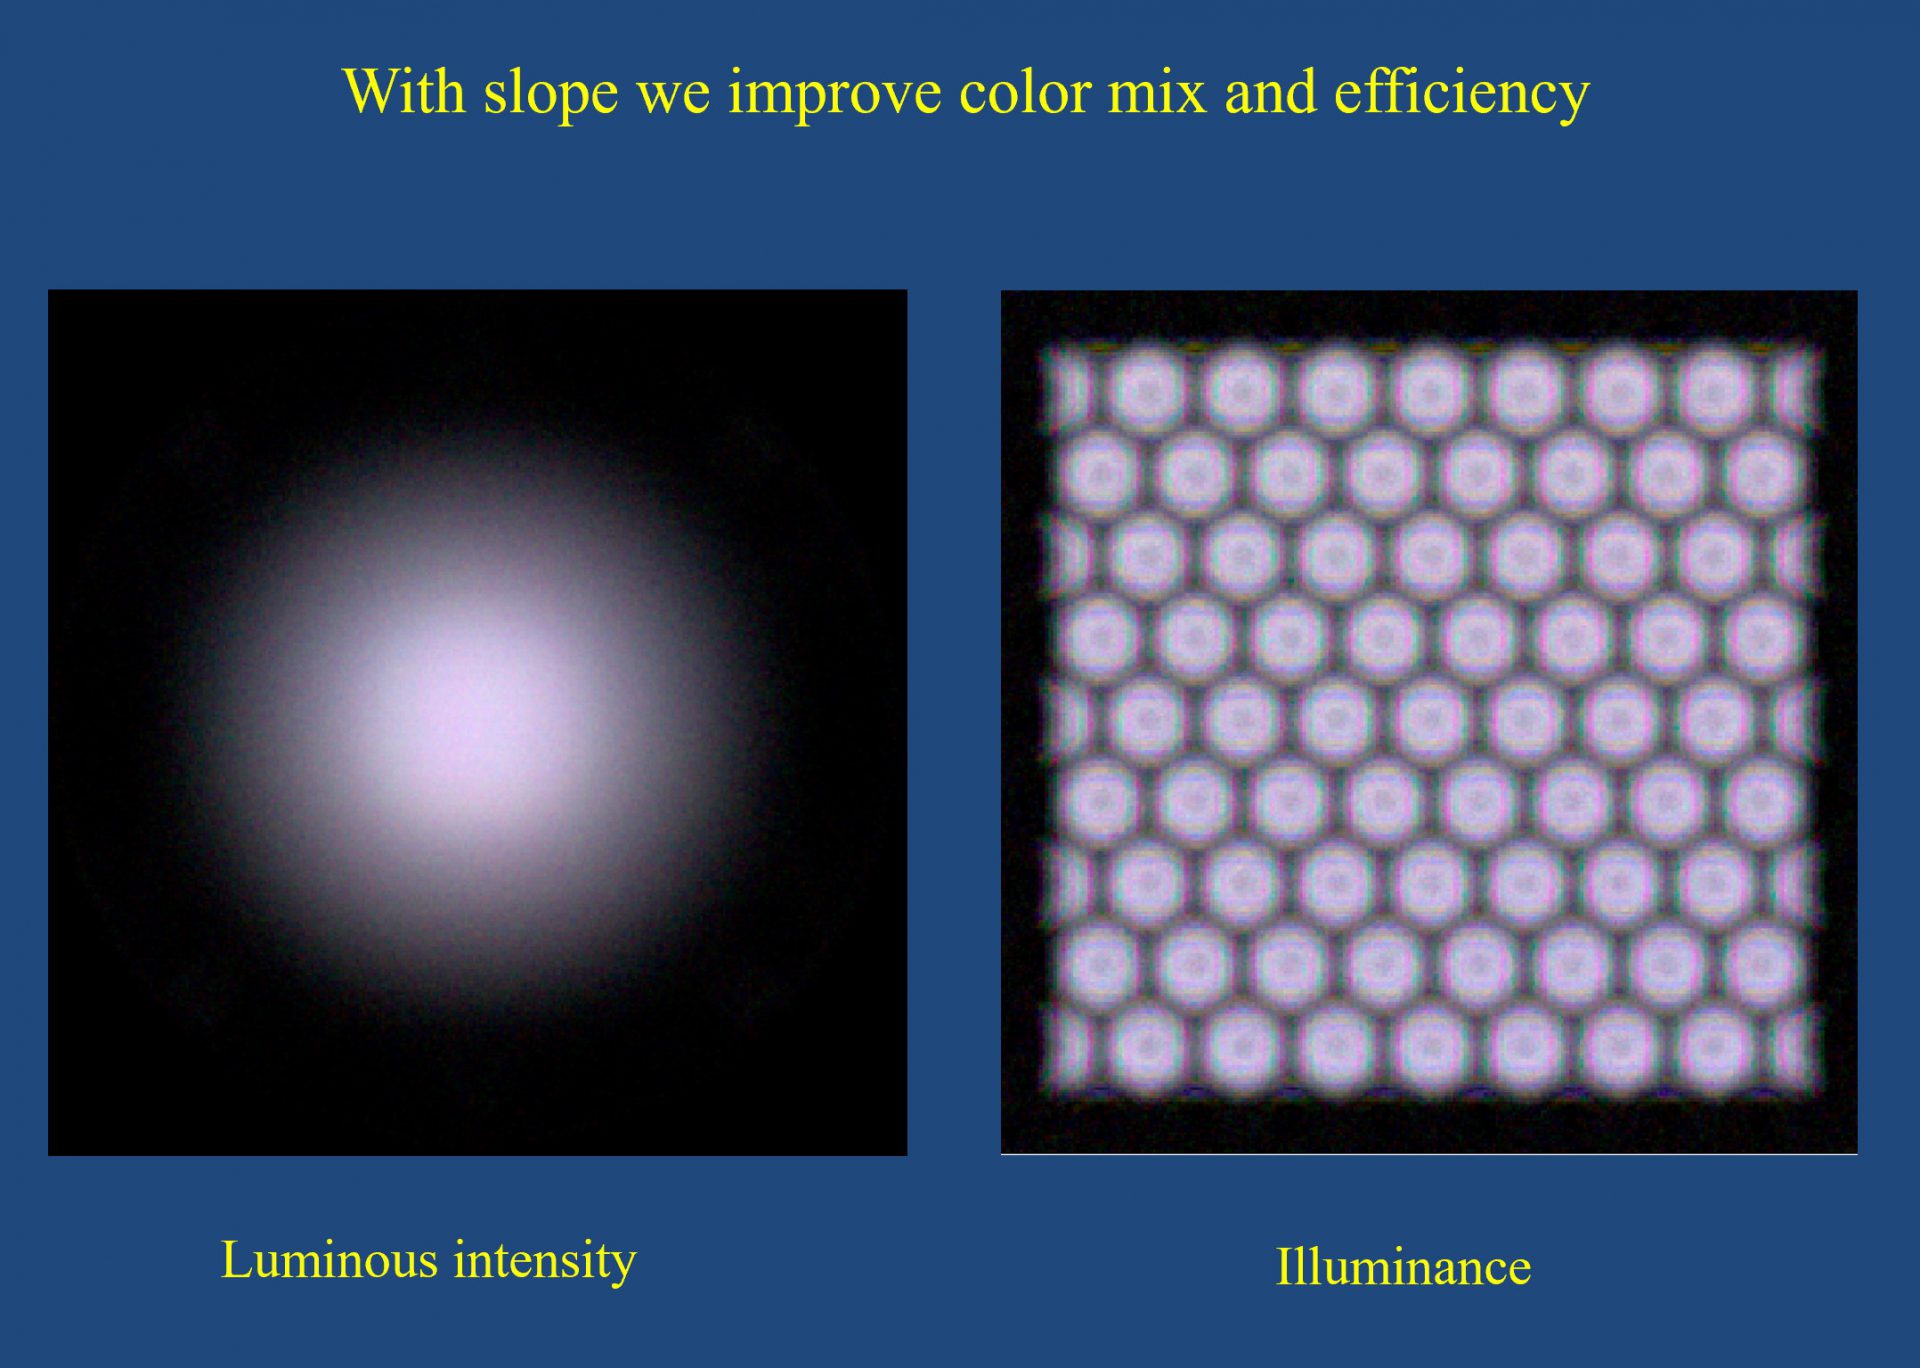 With slope, we can improve the color mix and efficiency